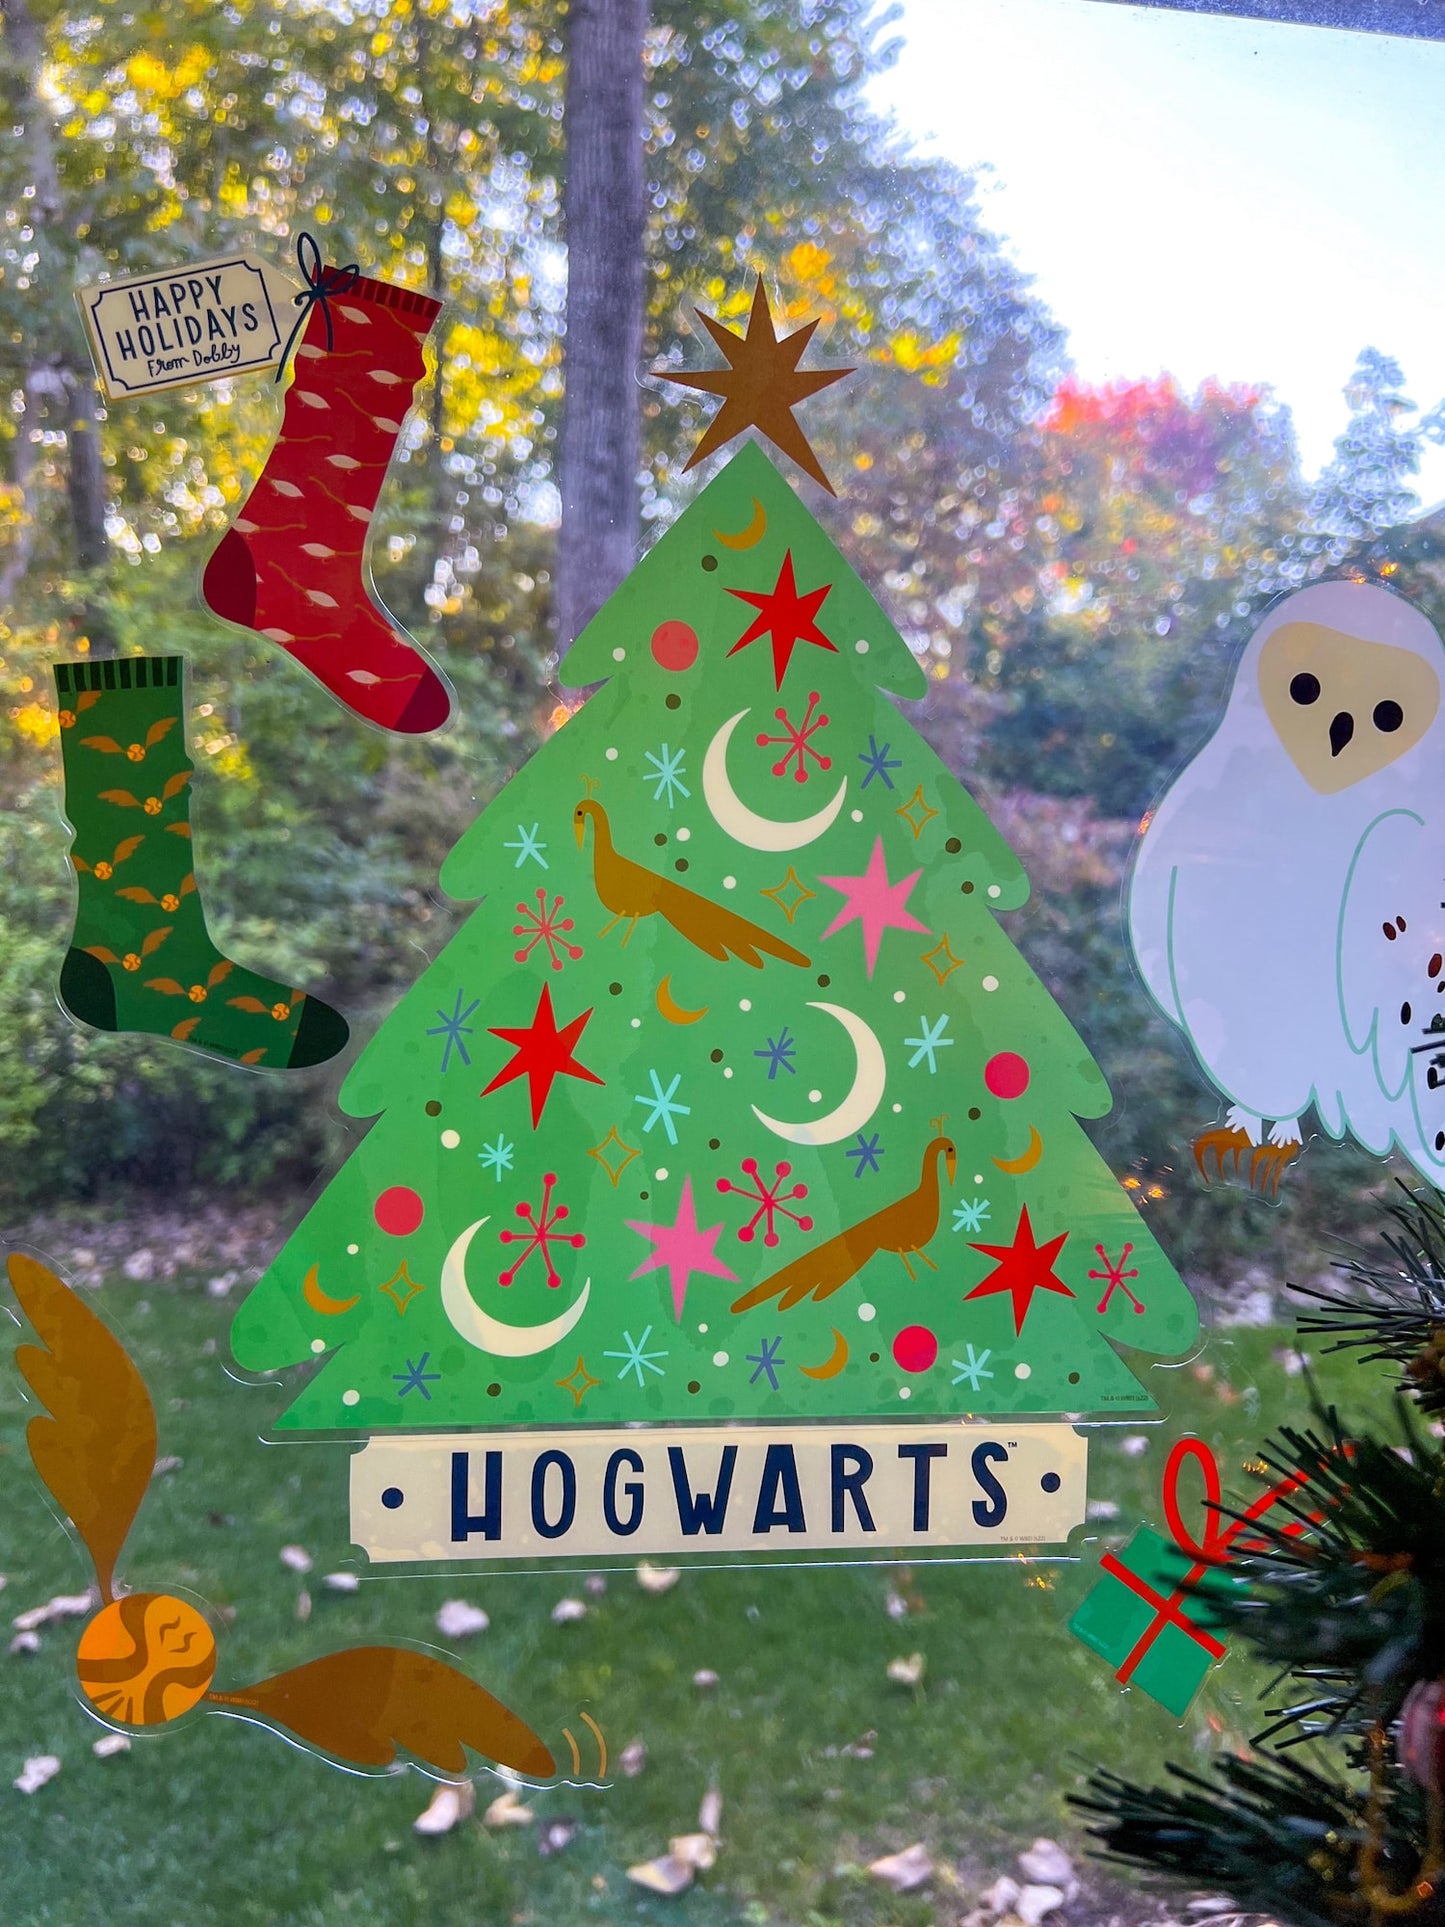 Harry Potter Holidays at Hogwarts Window Clings